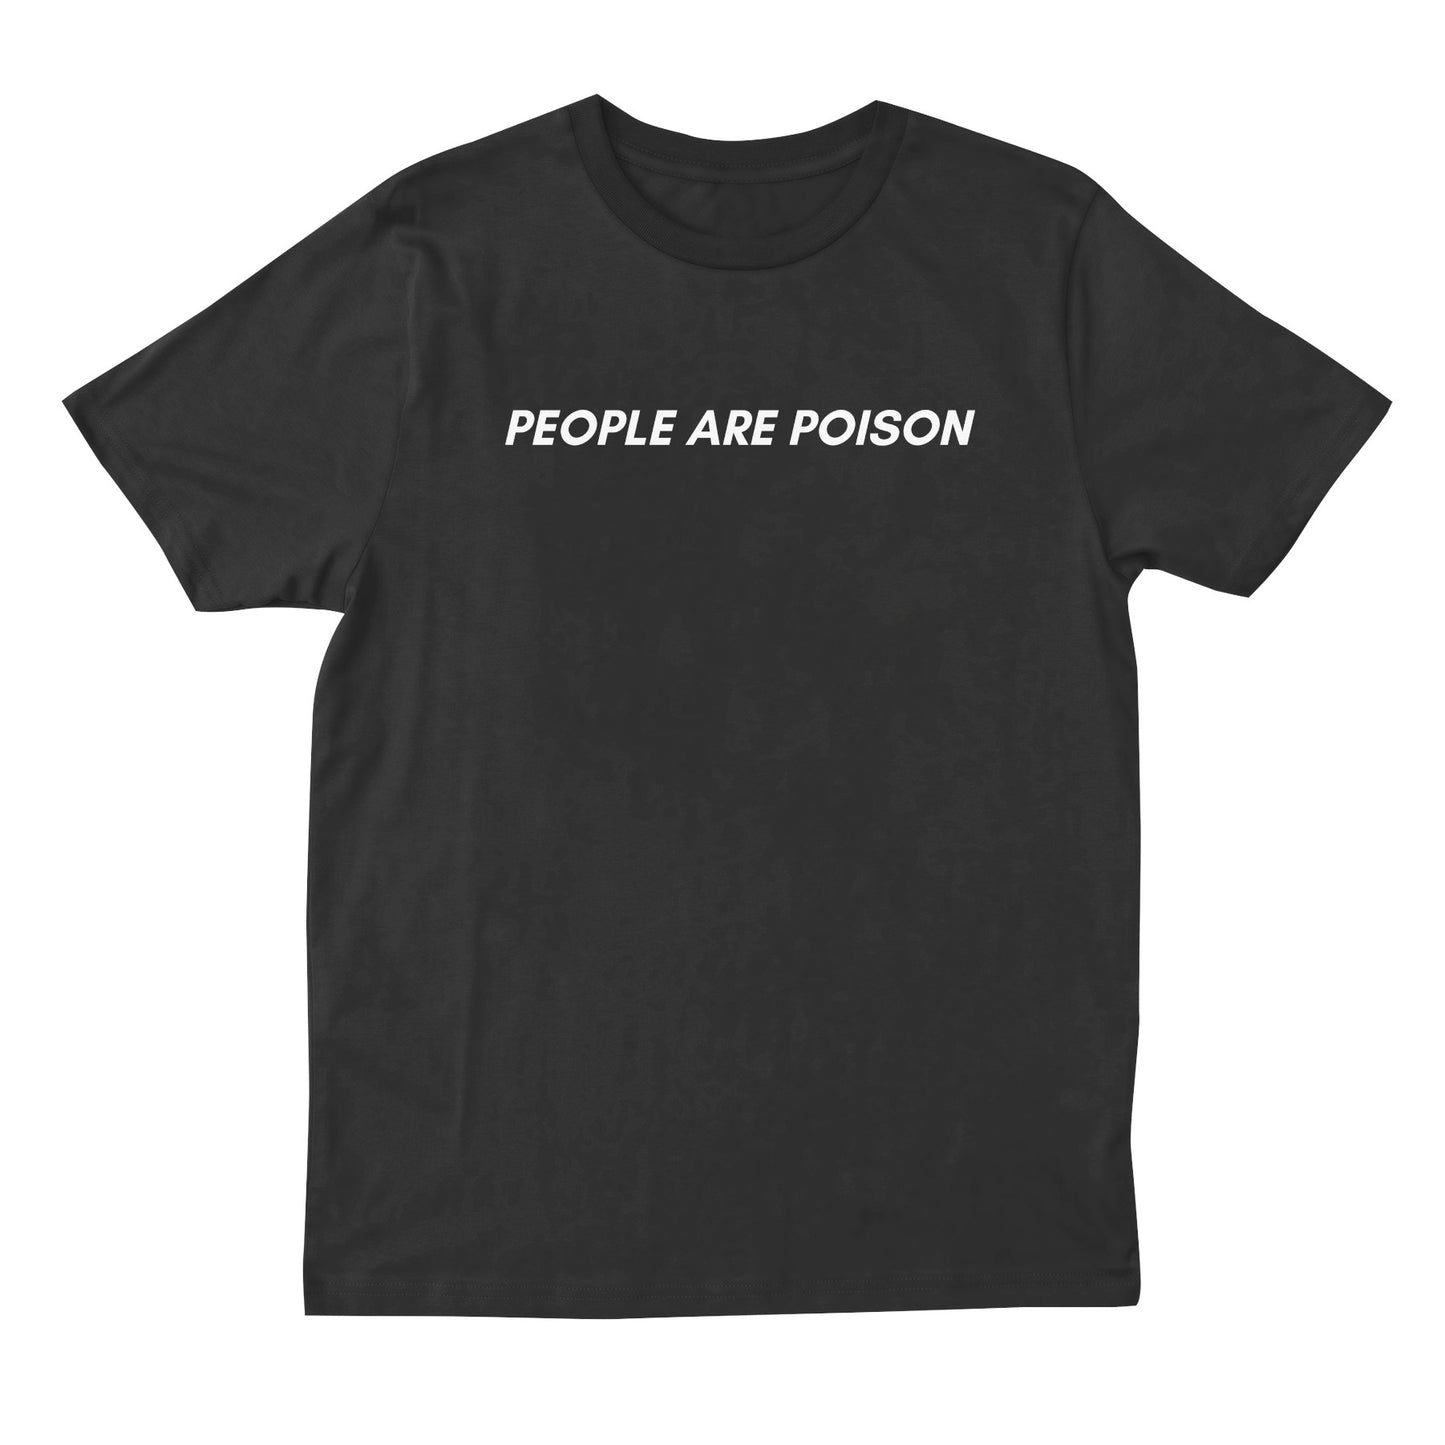 People Are Poison T-shirt